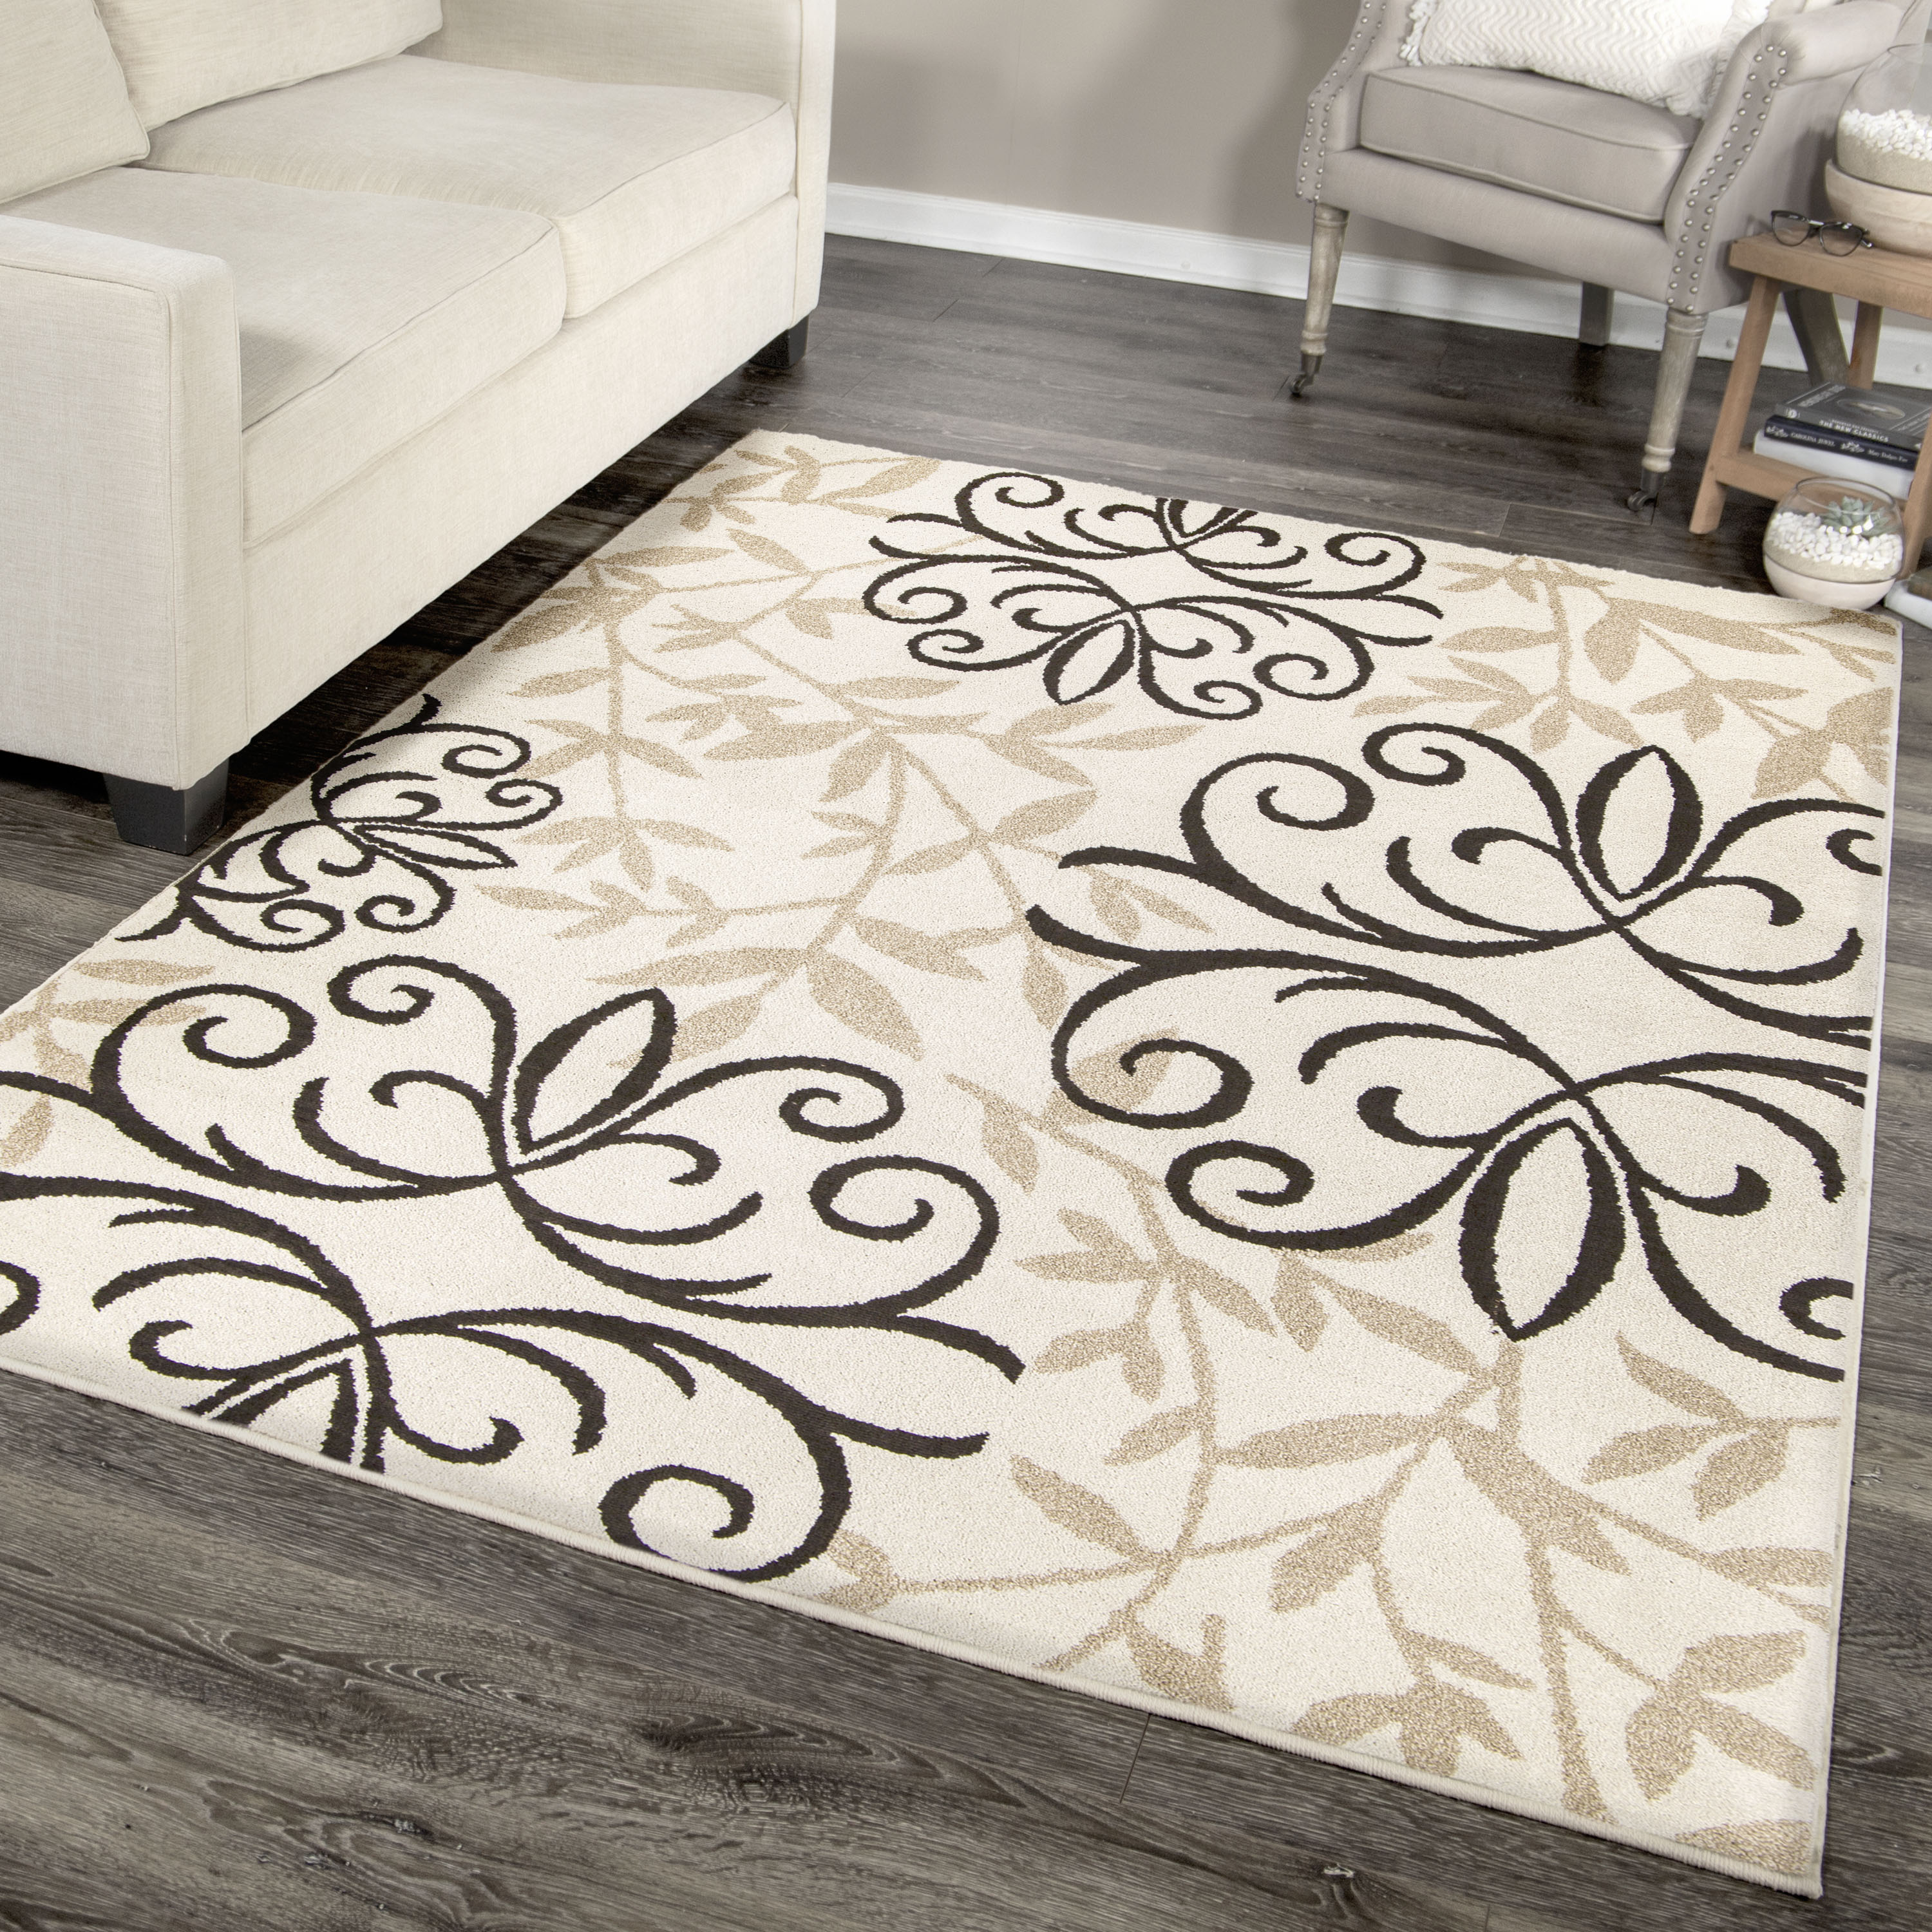 Better Homes & Gardens Iron Fleur Area Rug, Off-White, 7'10" x 10'10" - image 1 of 8